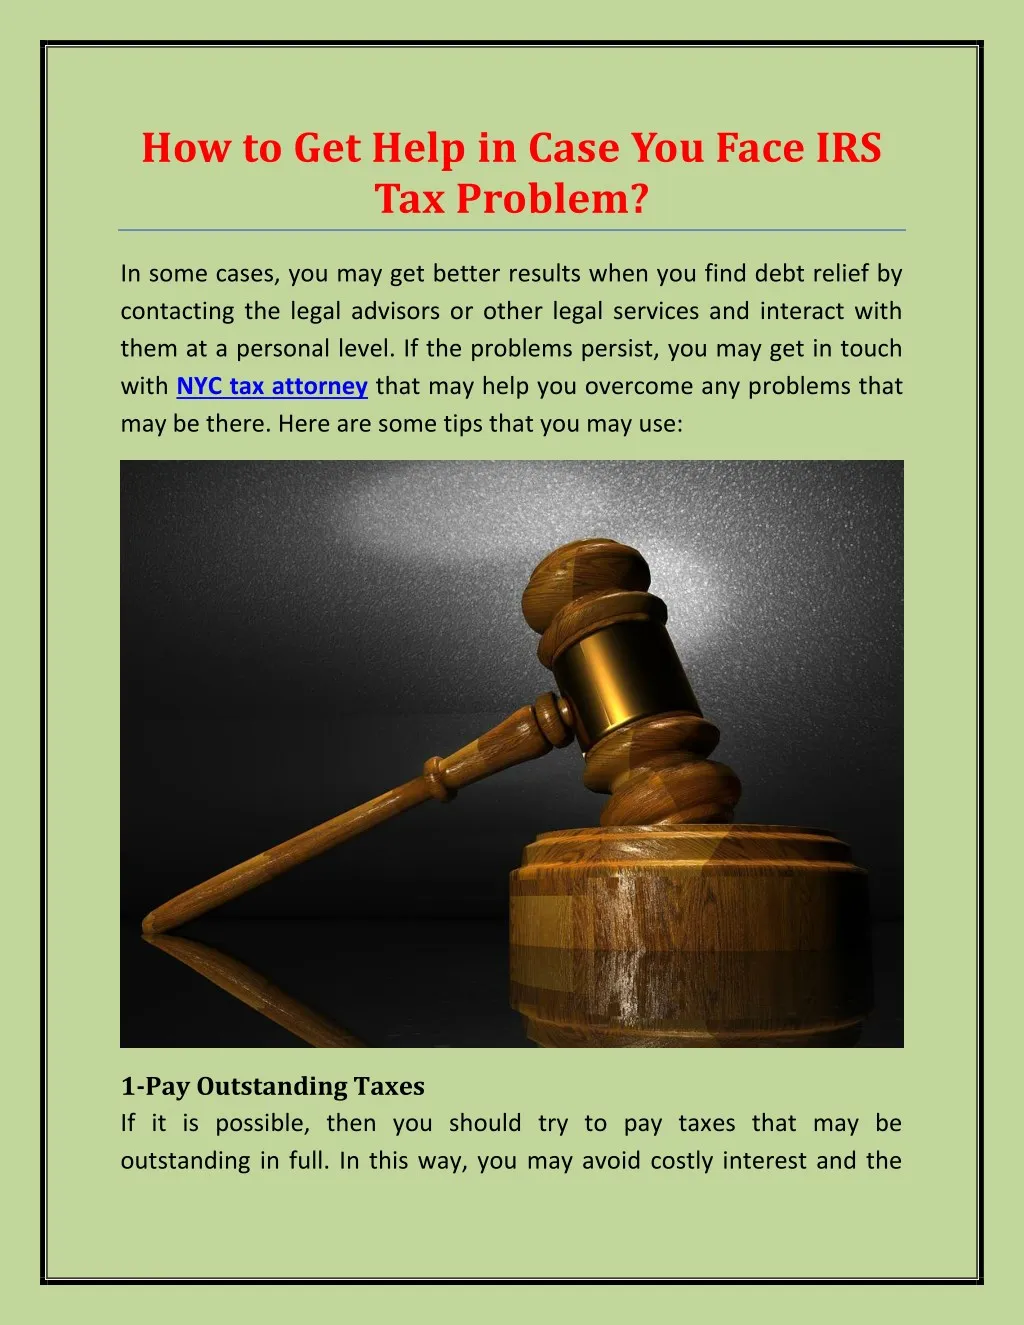 how to get help in case you face irs tax problem